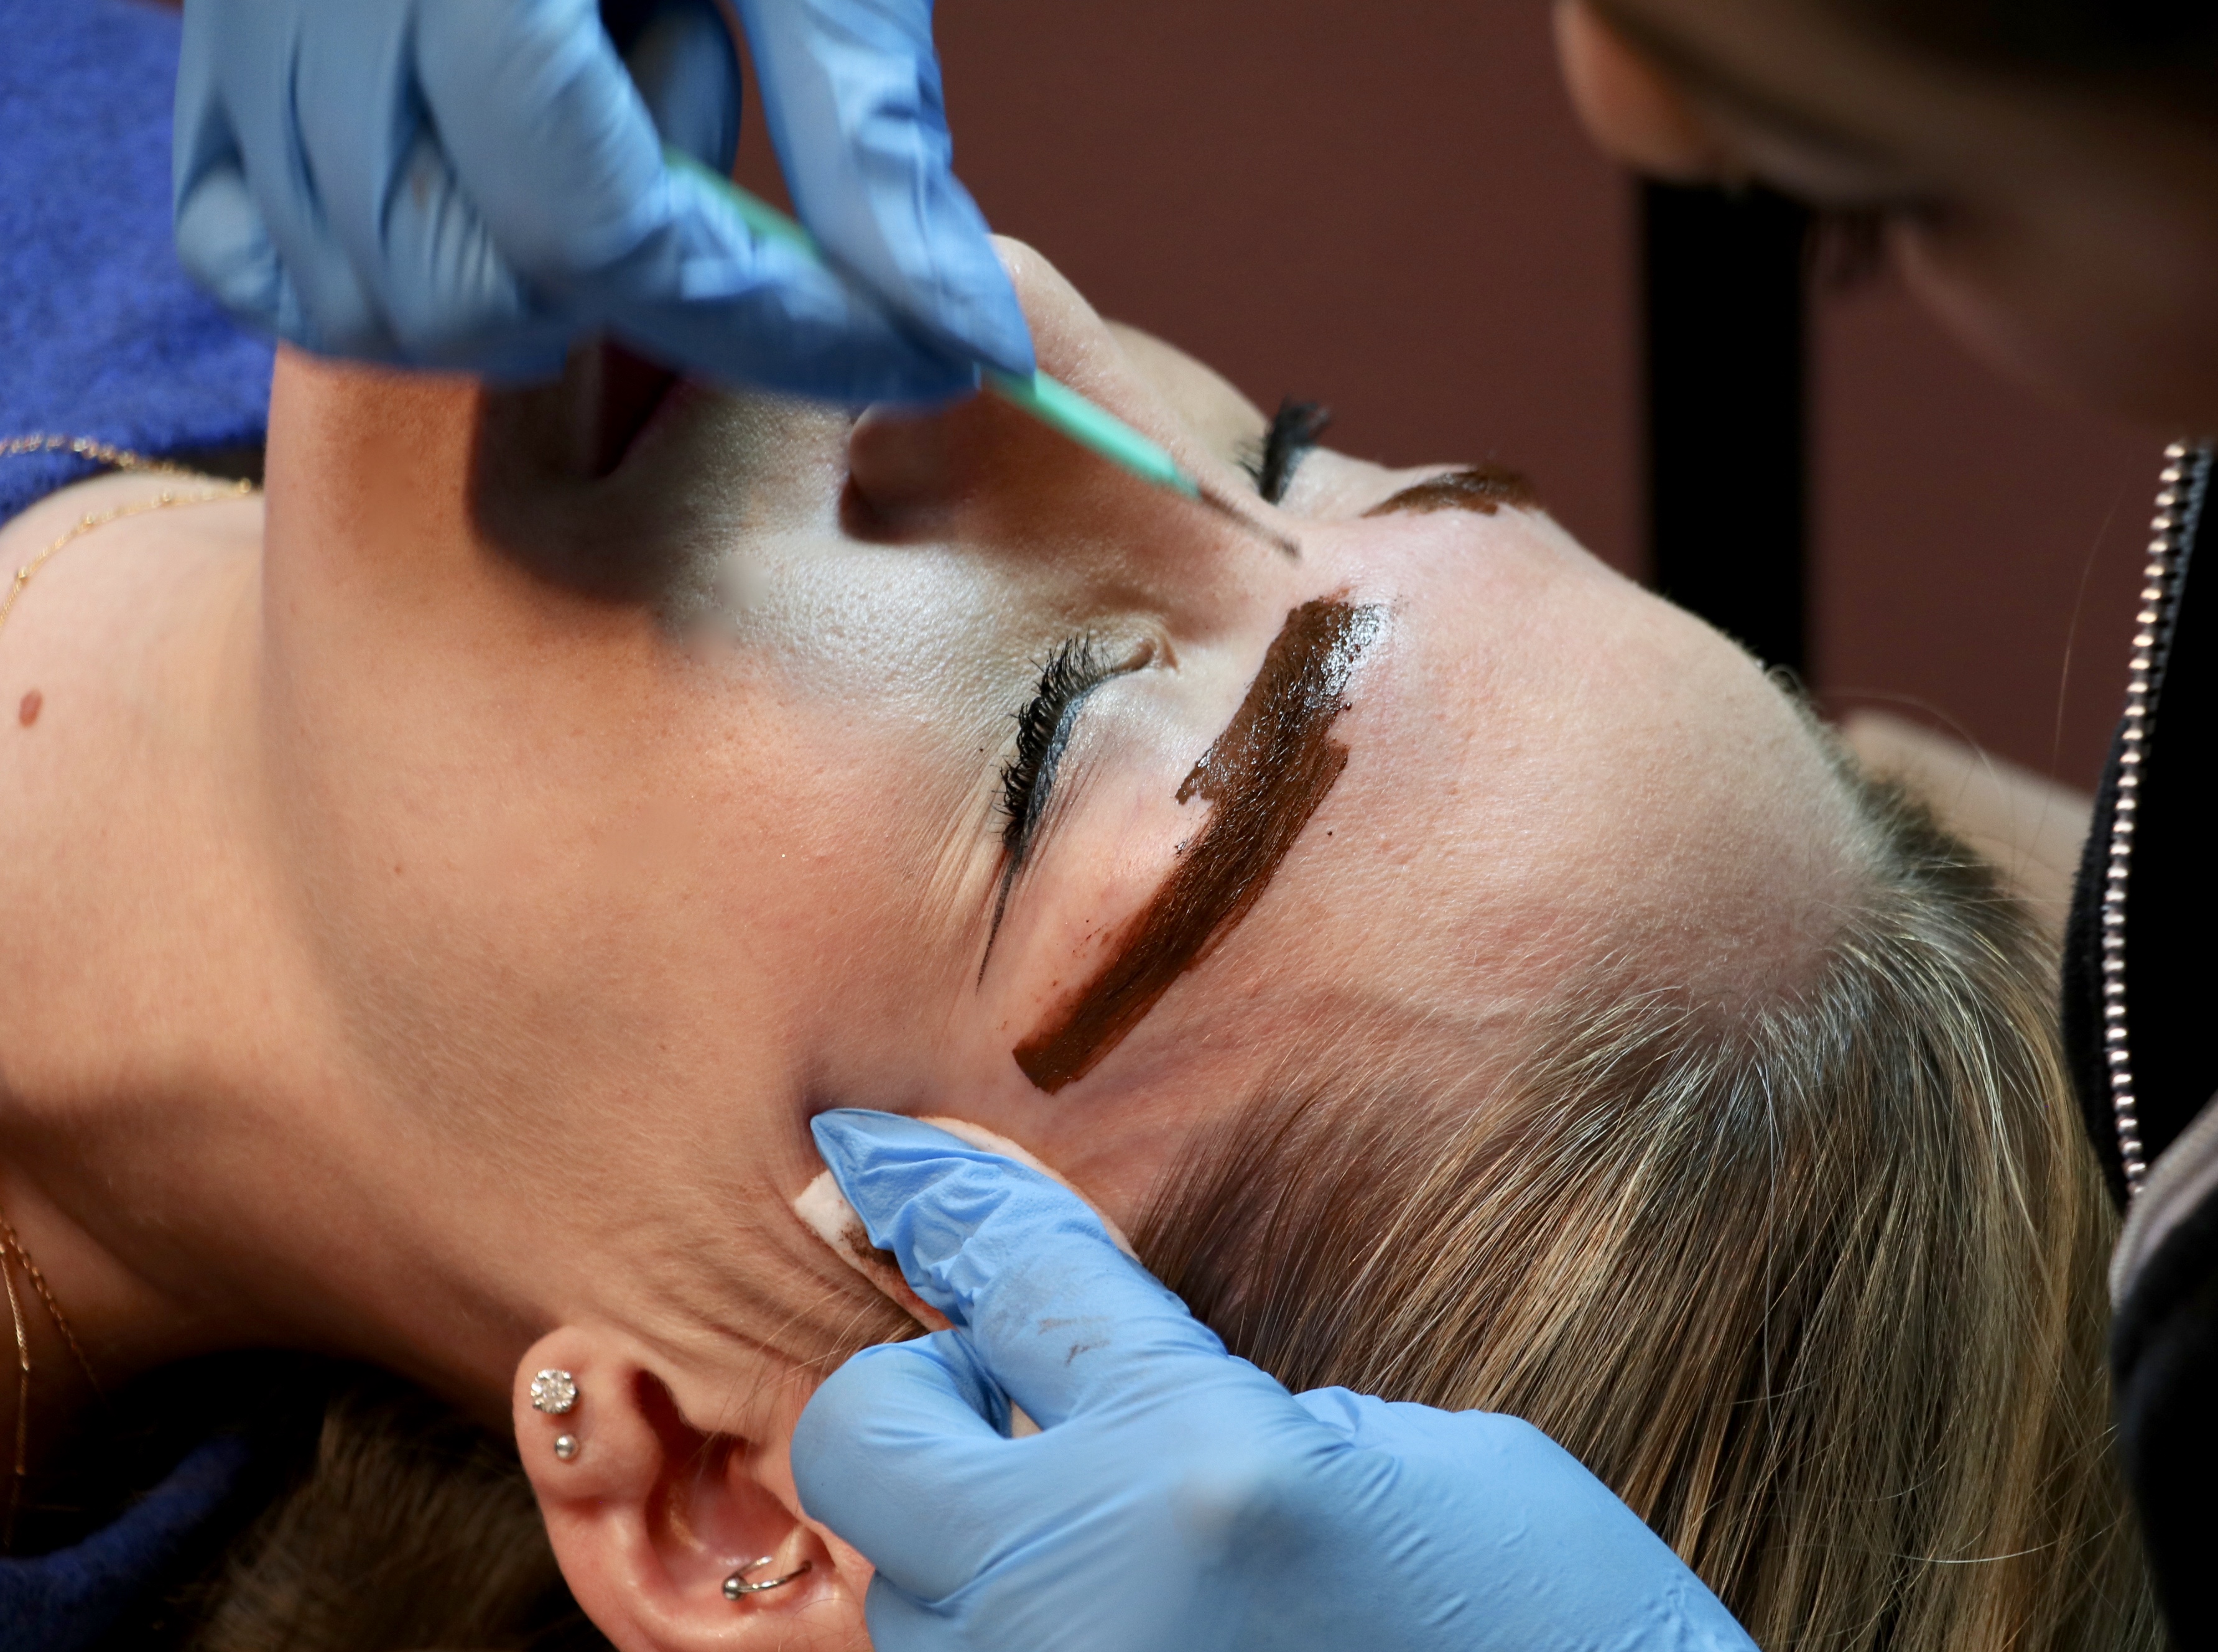 microblading process review